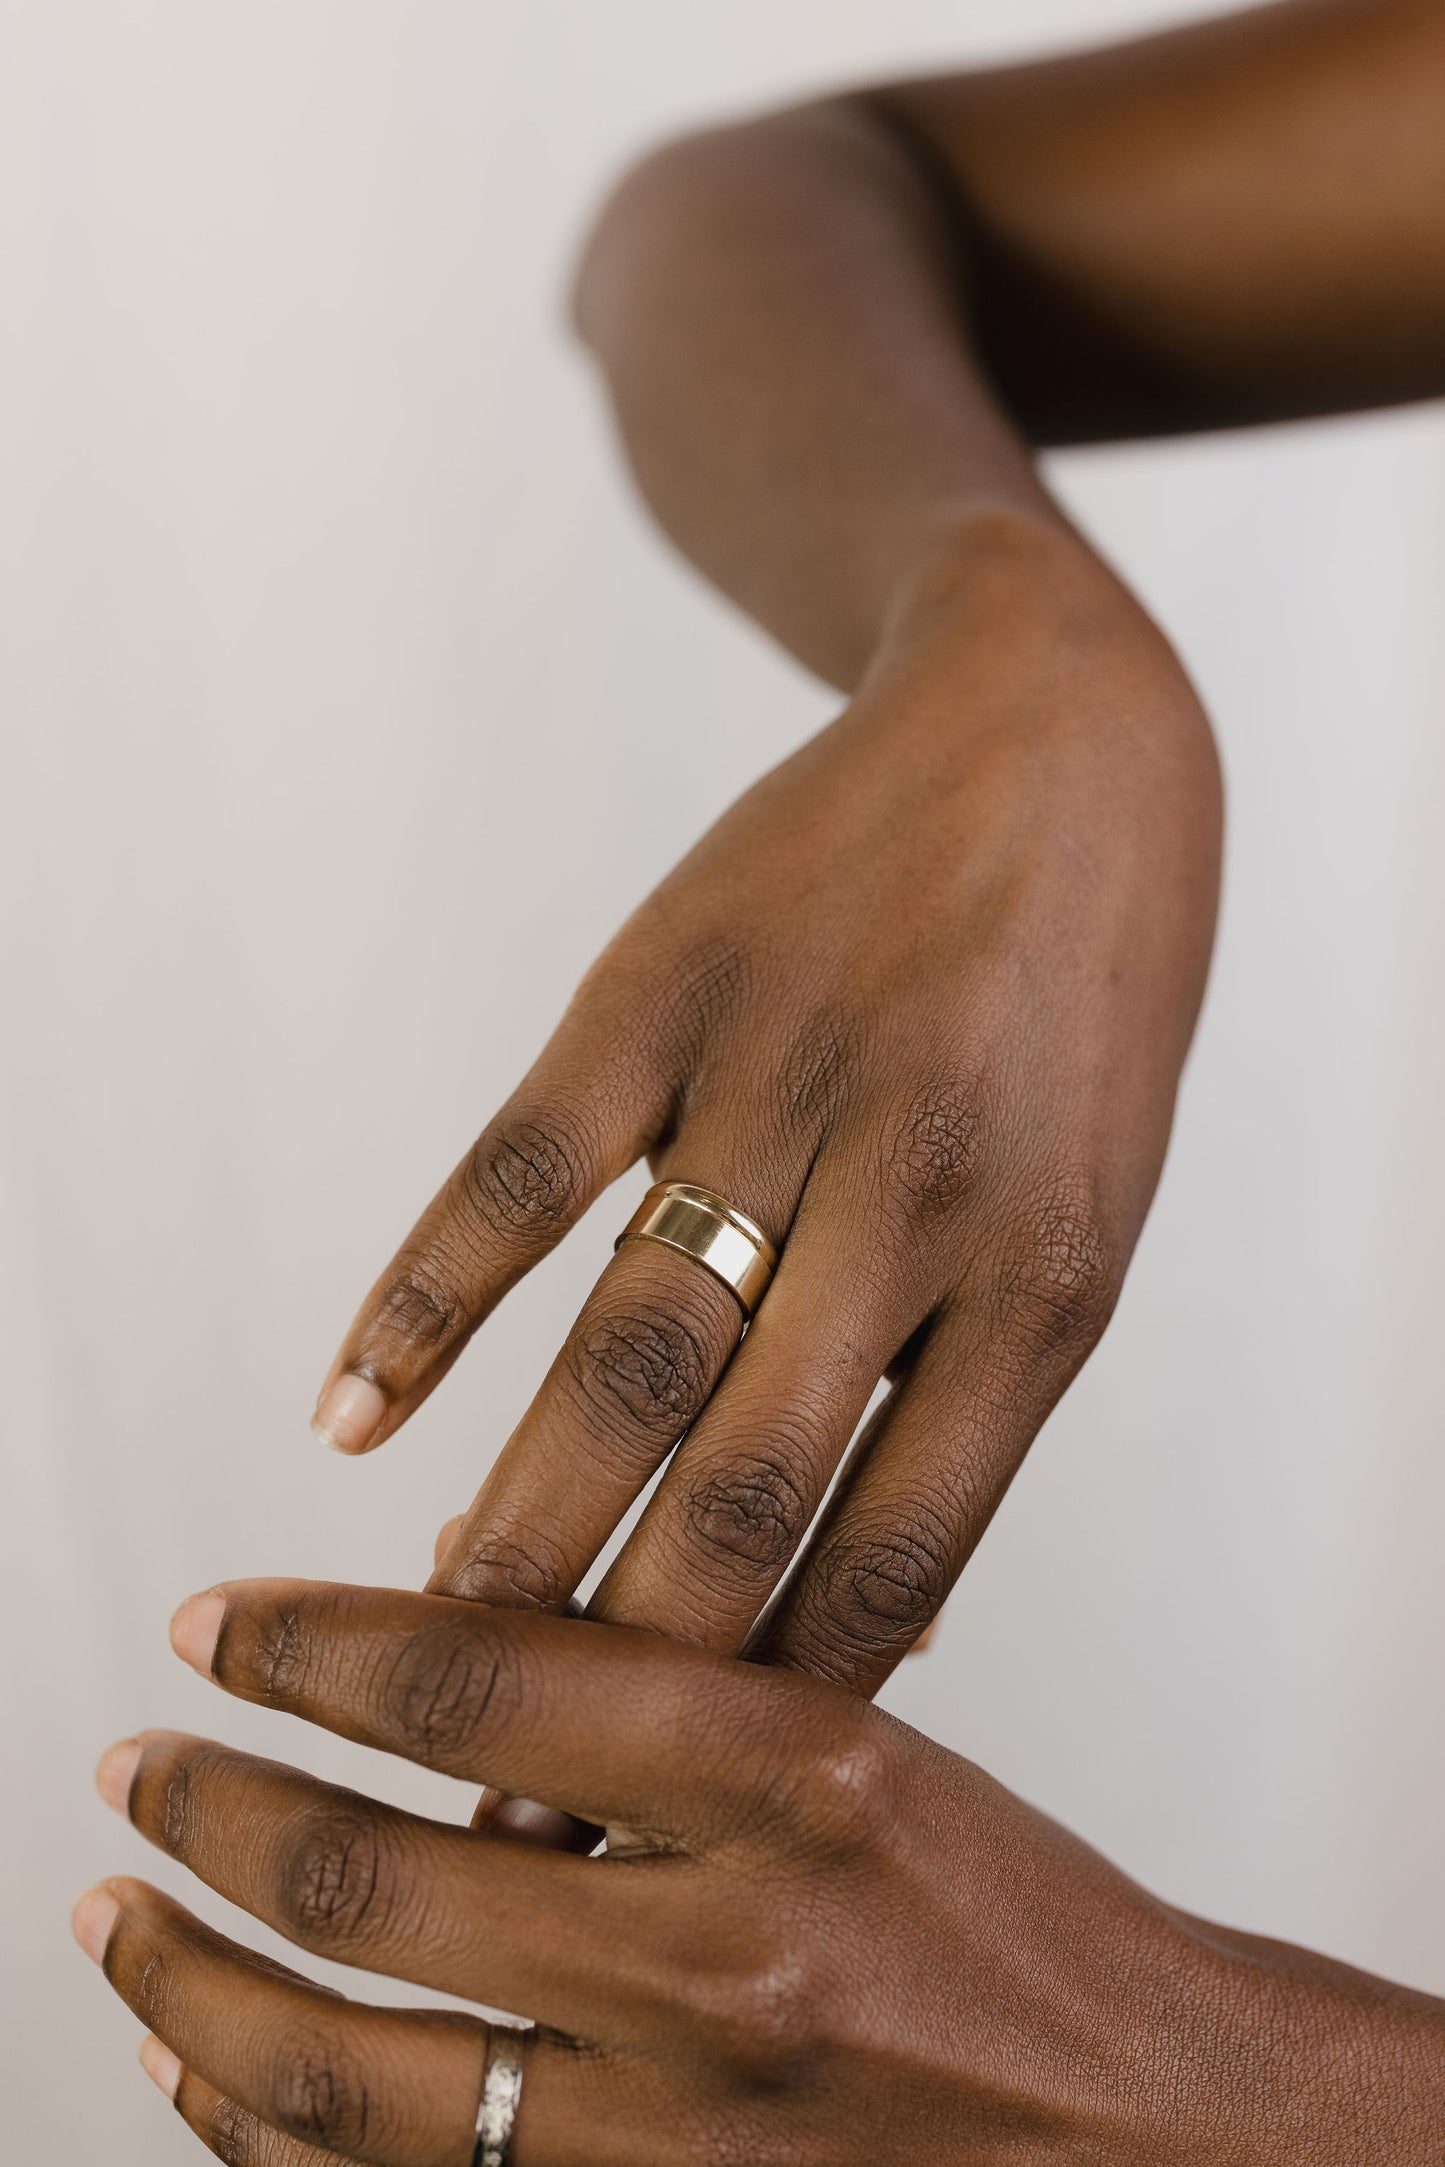 model wearing a wide flat wedding band stacked with a smaller gold band on their ring finger